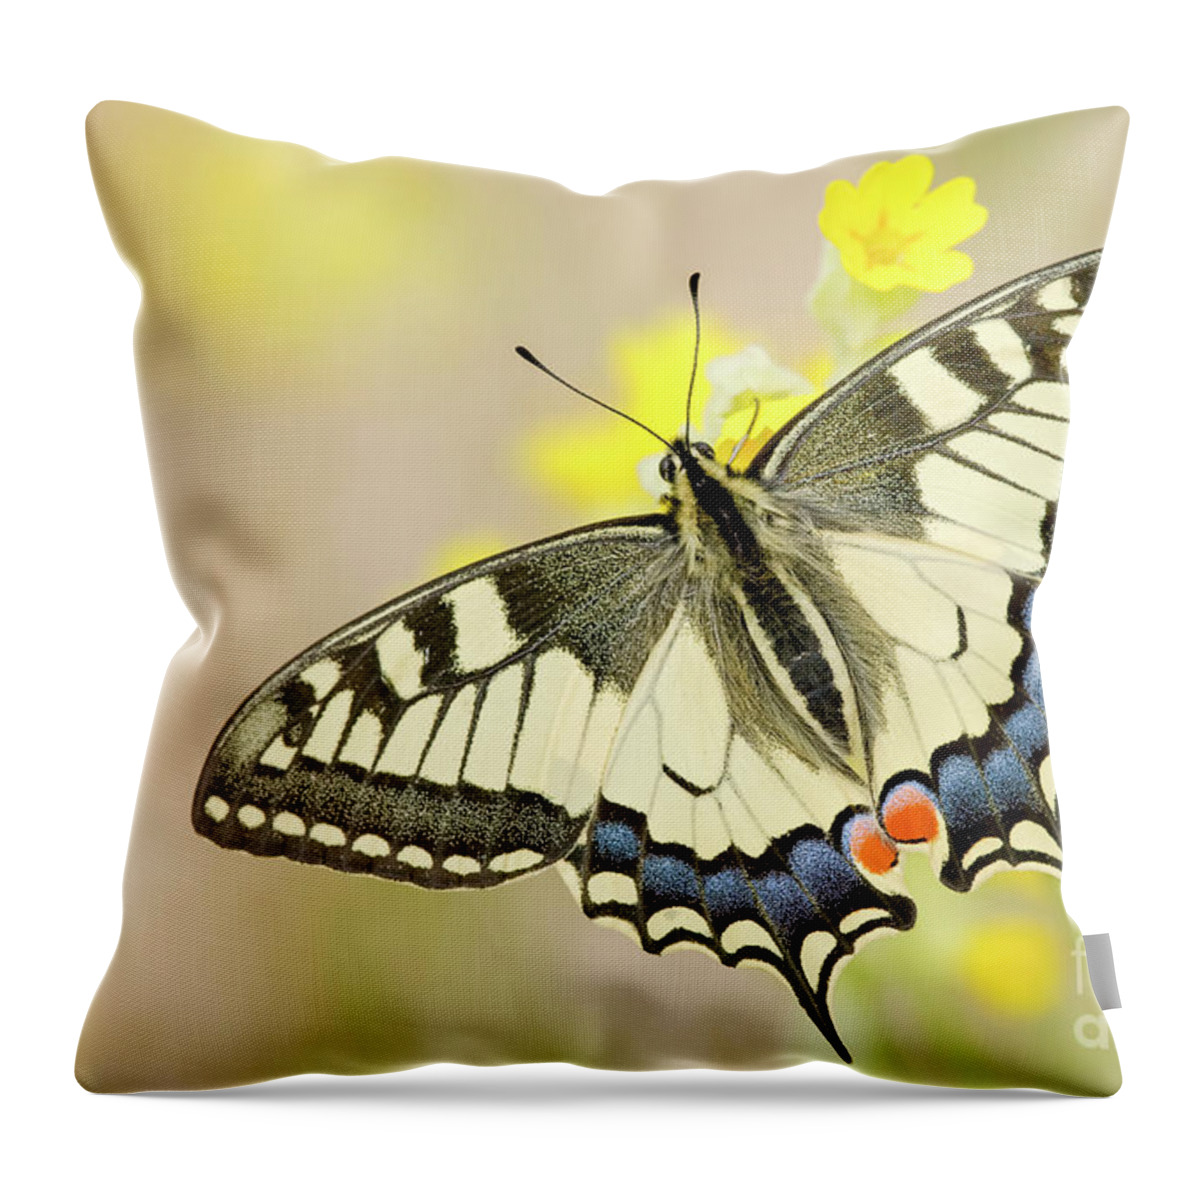 Swallowtail Butterfly Throw Pillow featuring the photograph Old World Swallowtail Papilio Machaon by Karin Rollett-vlcek